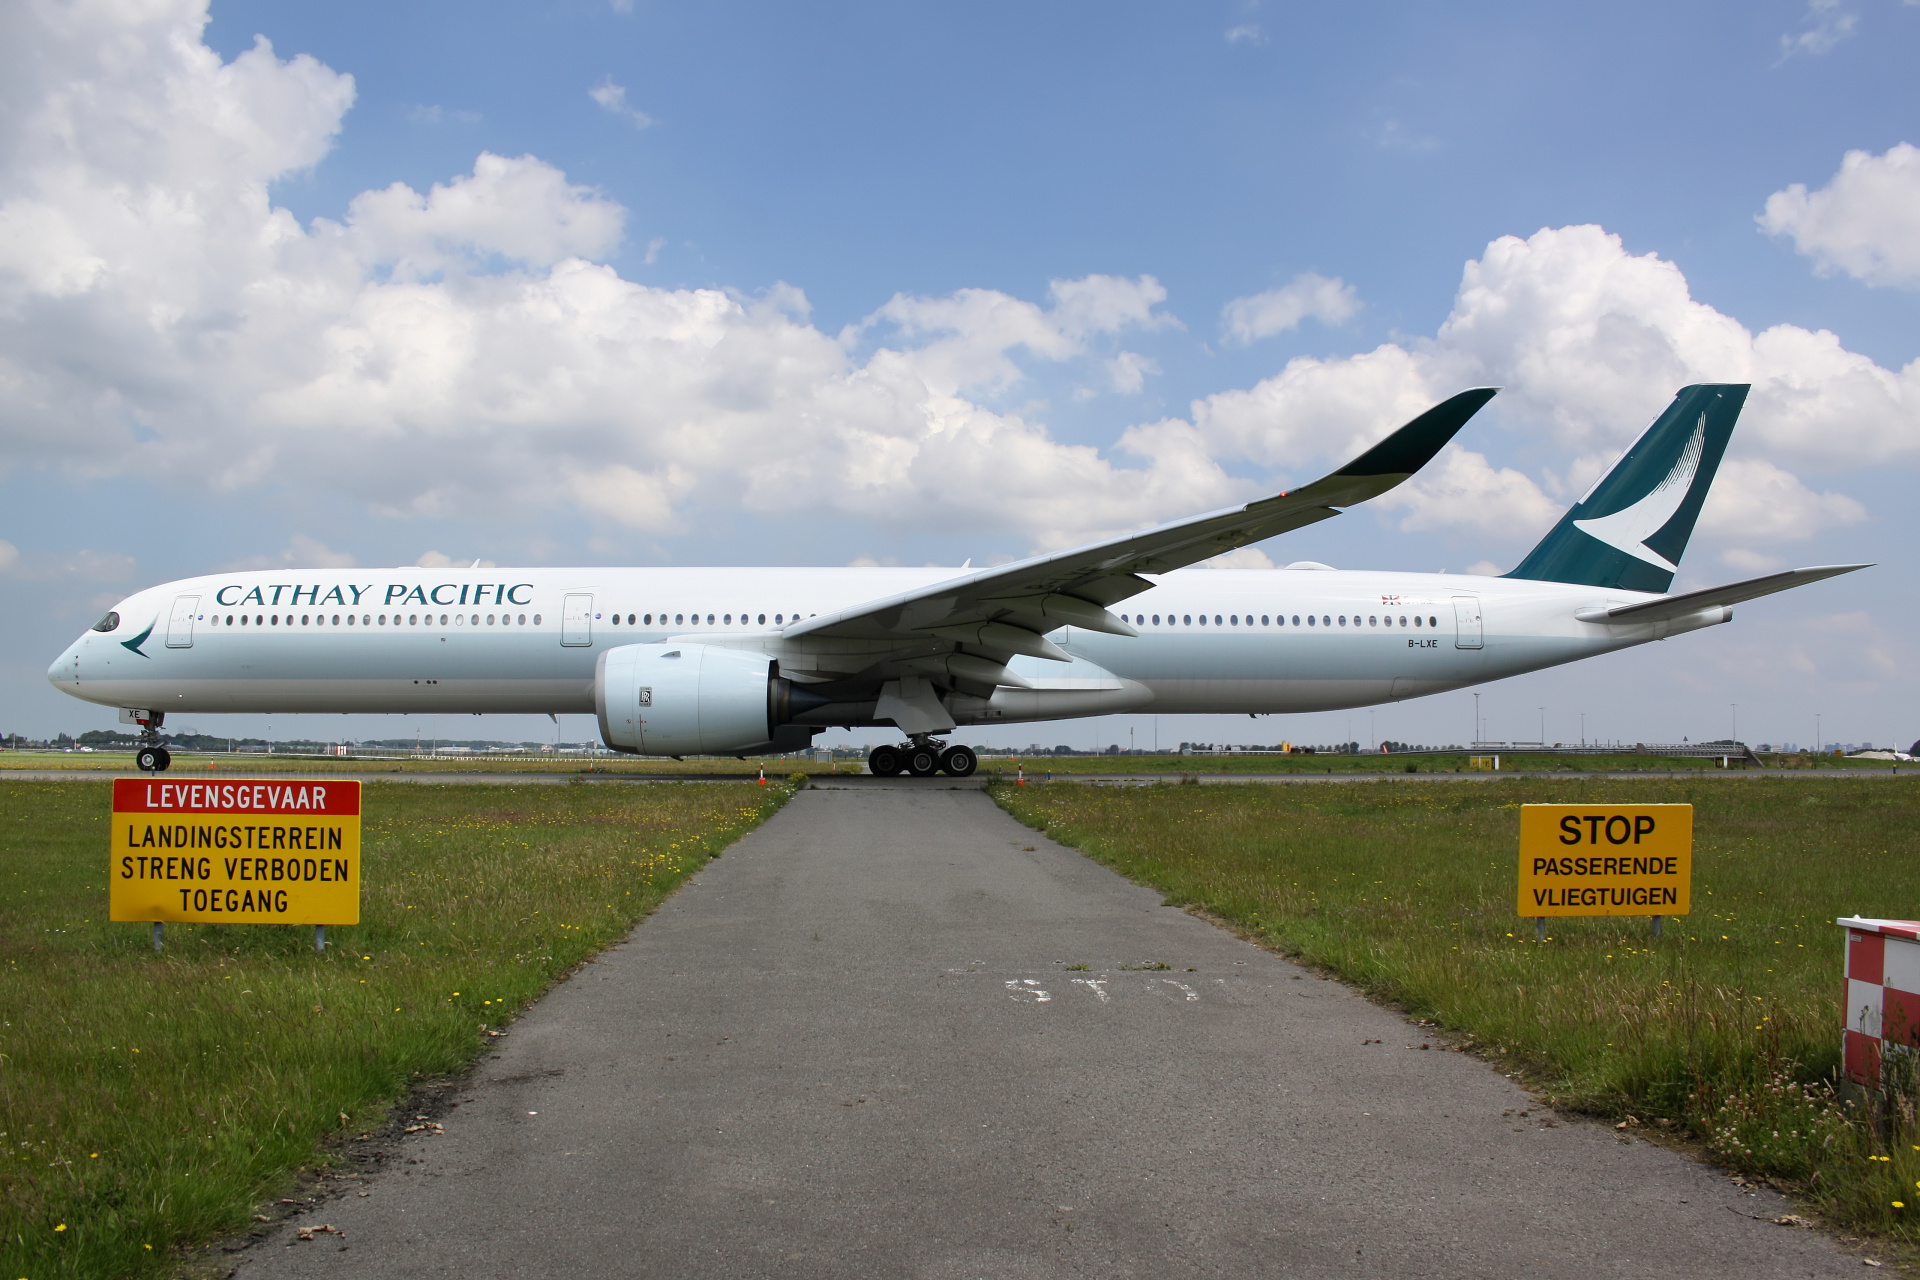 B-LXE, Cathay Pacific (Aircraft » Schiphol Spotting » Airbus A350-1000)